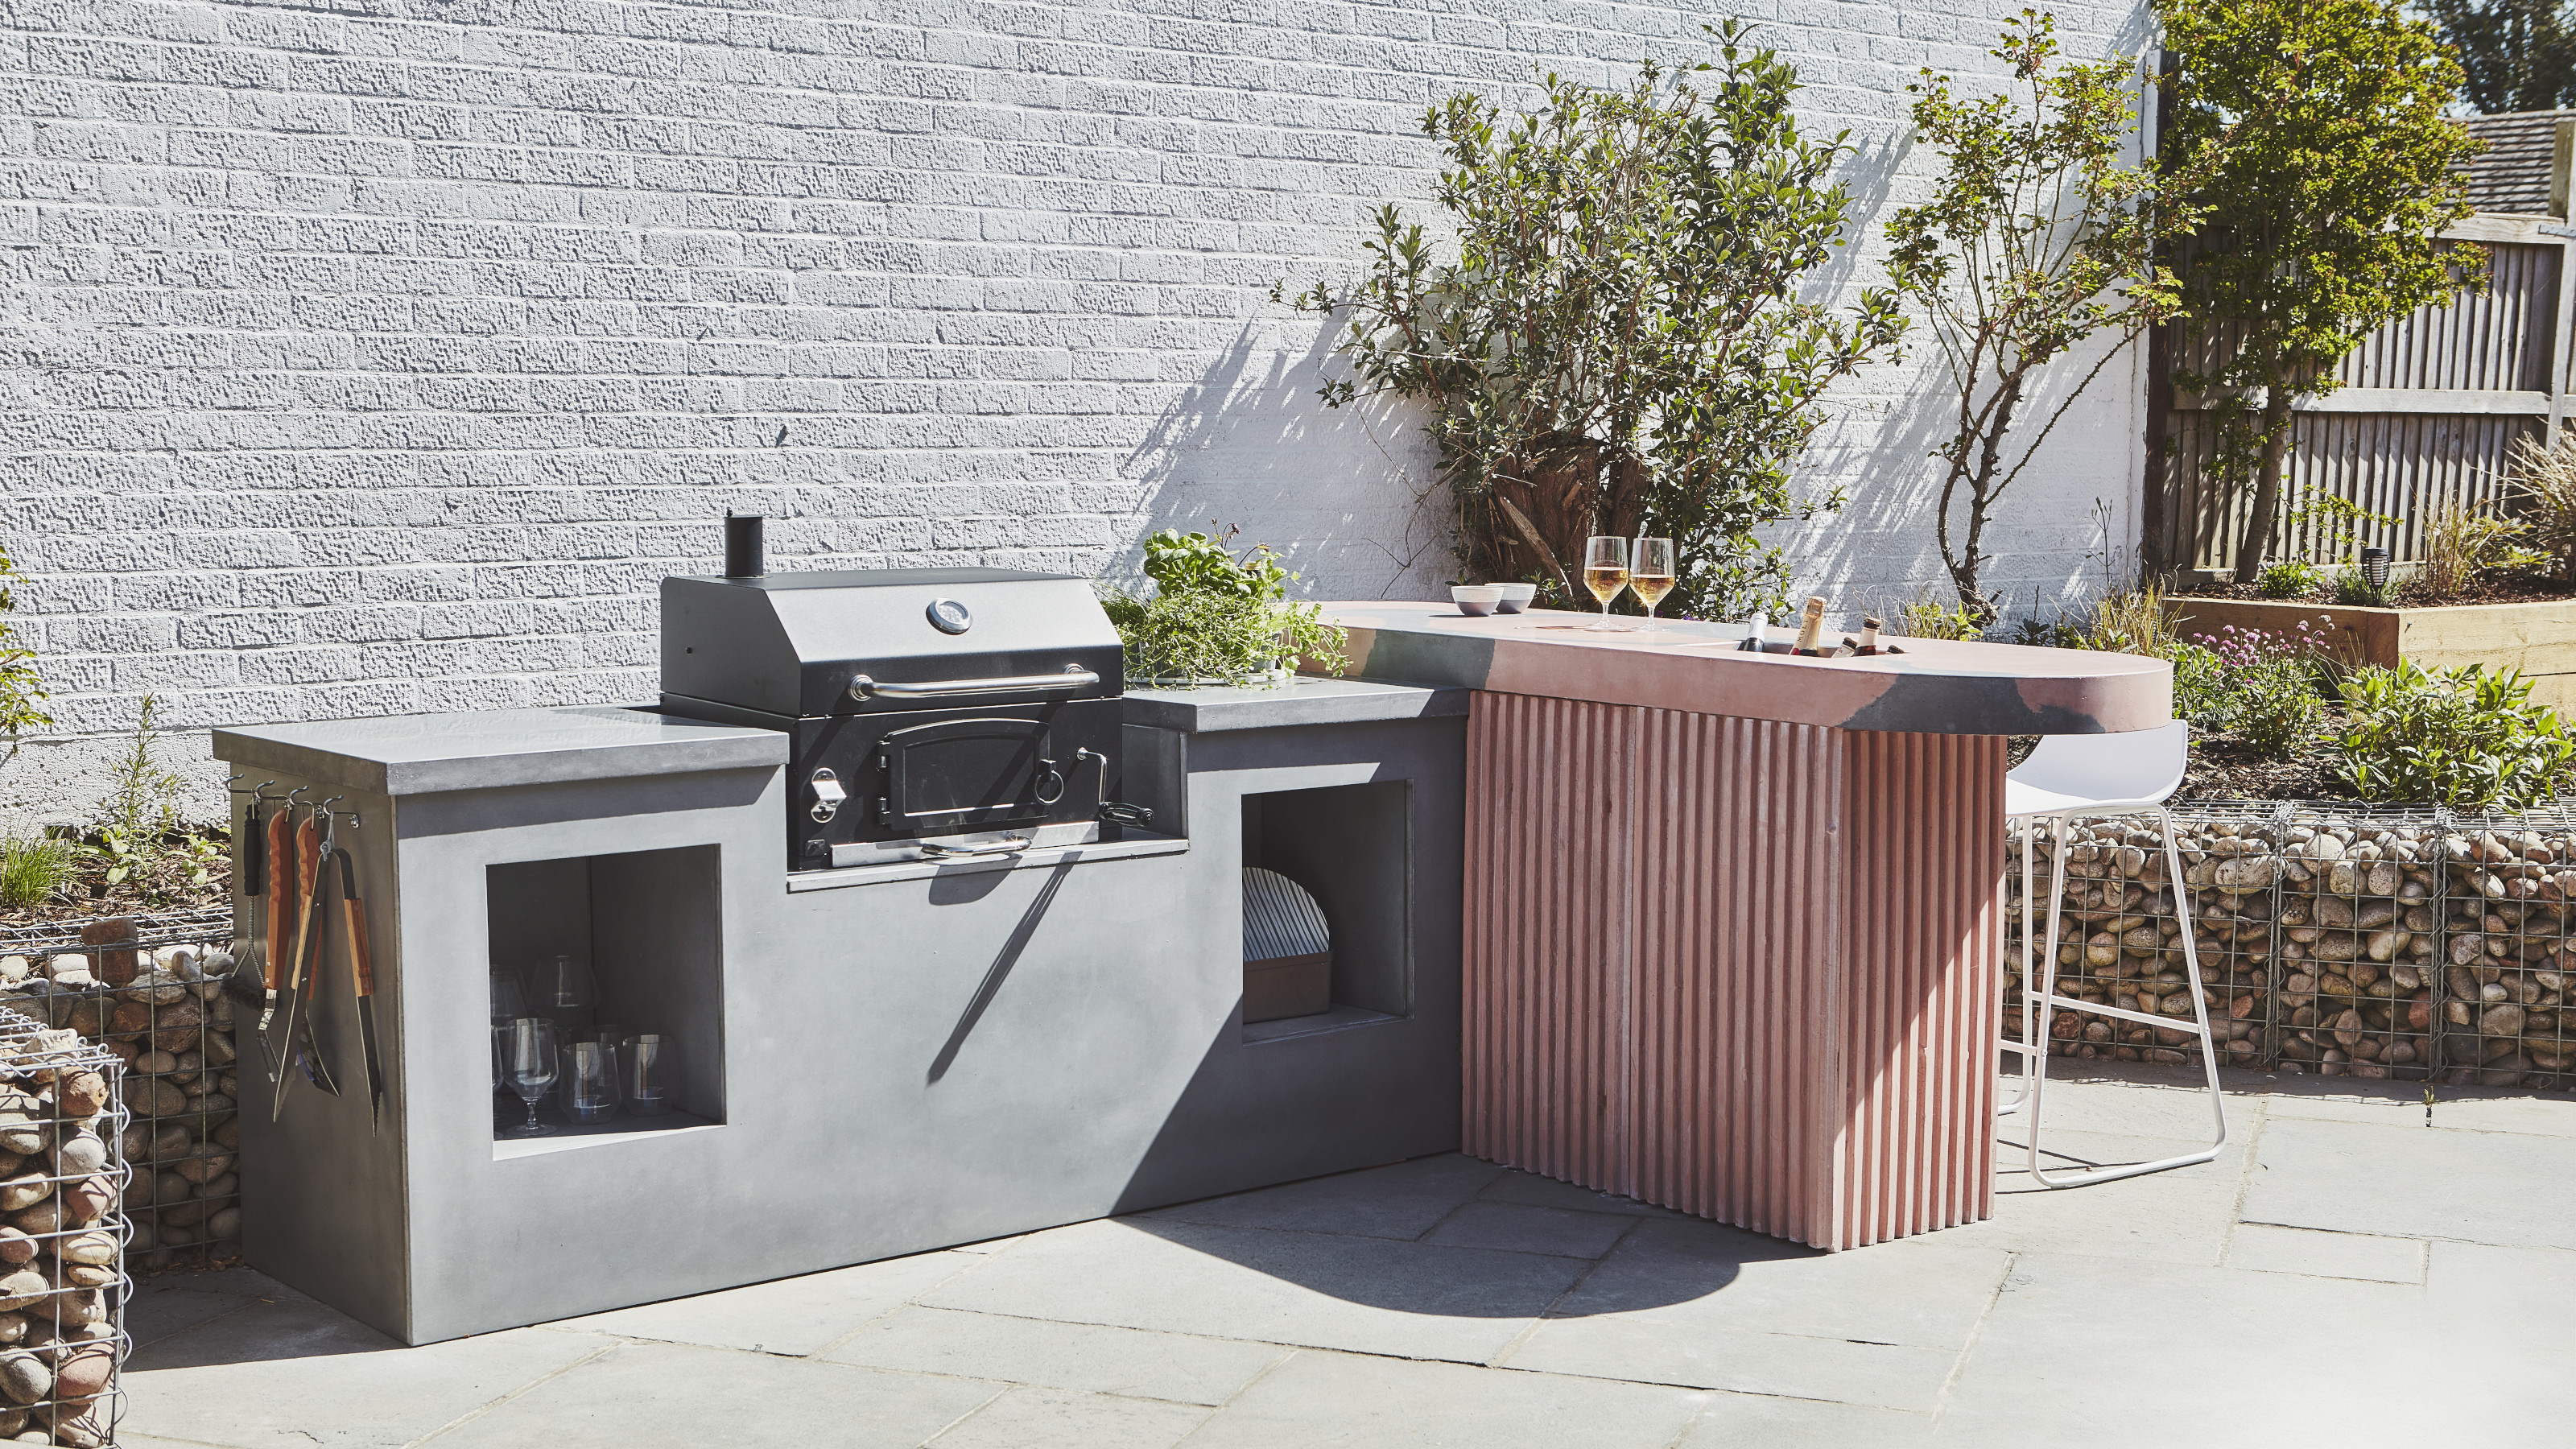 Creating An Inexpensive Outdoor Kitchen With Concrete Countertops